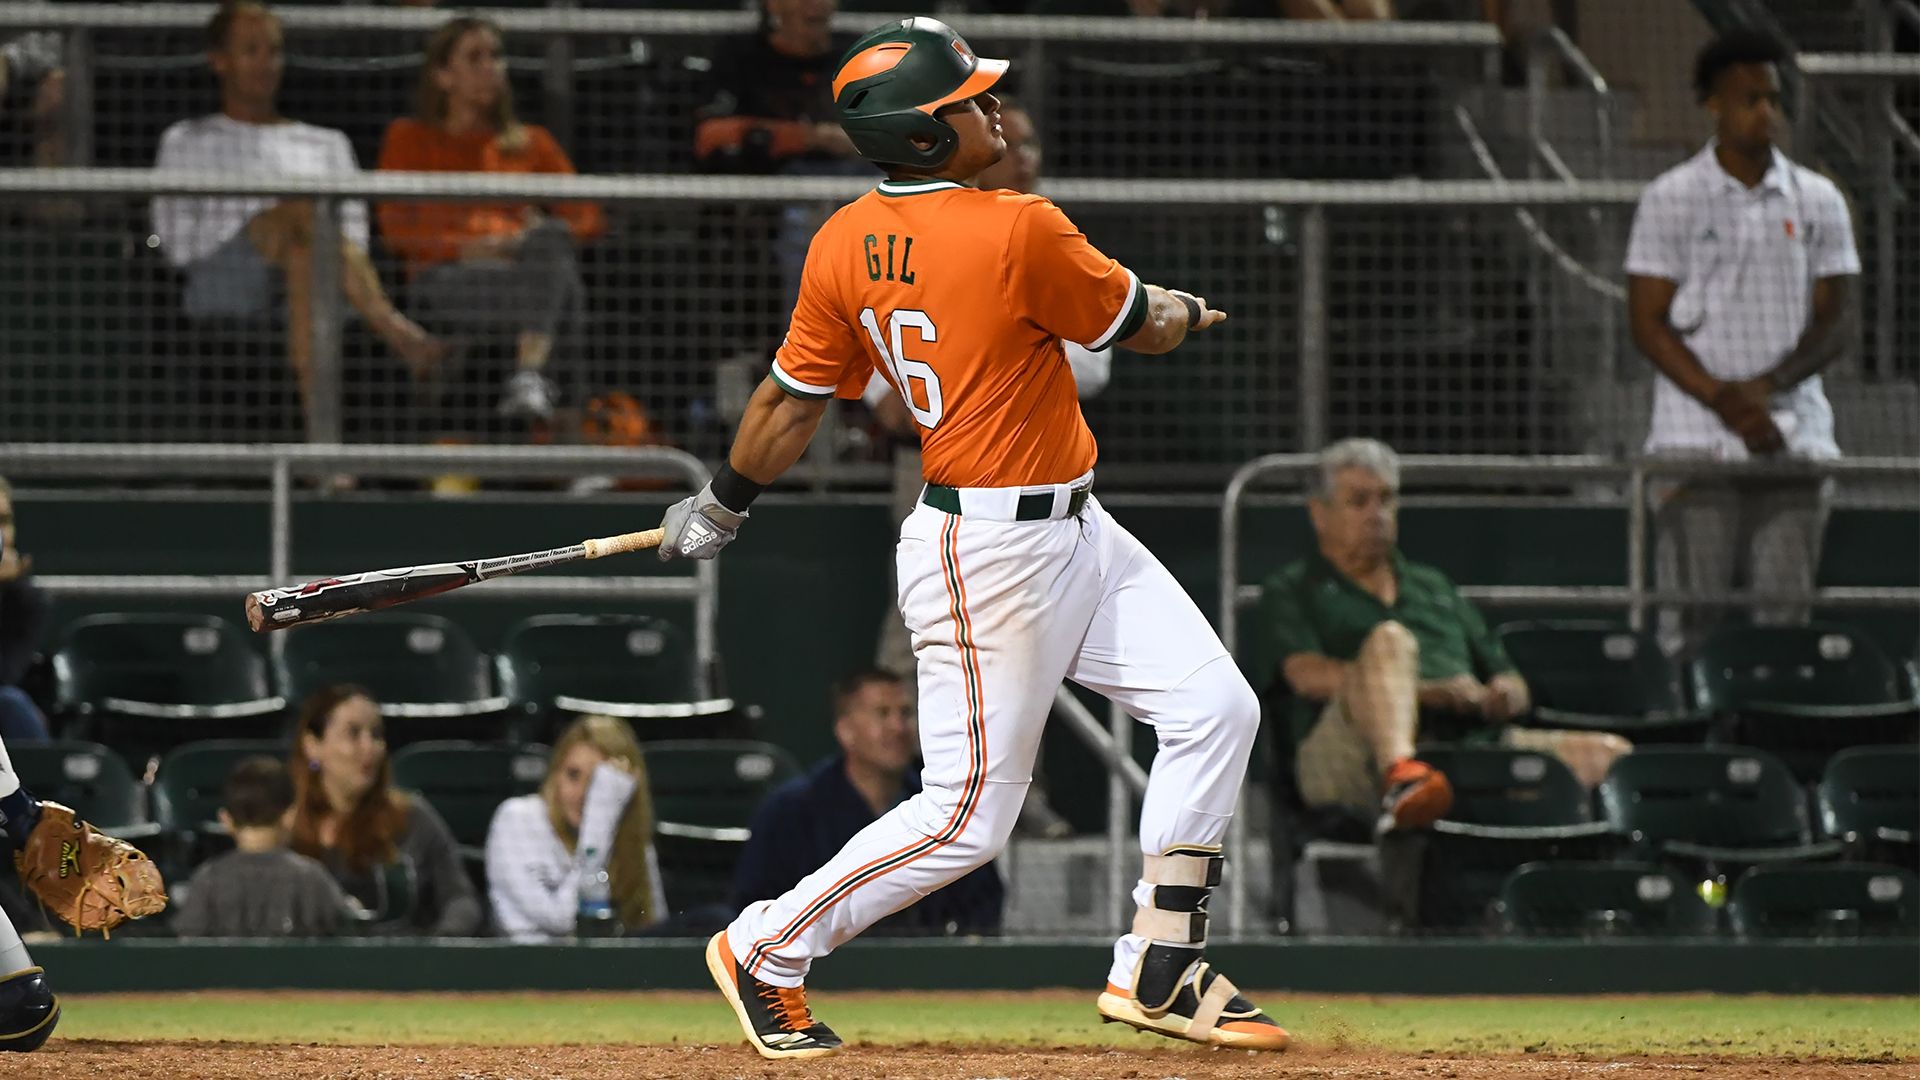 Canes Crush Four Homers in 16-6 Win at FAU